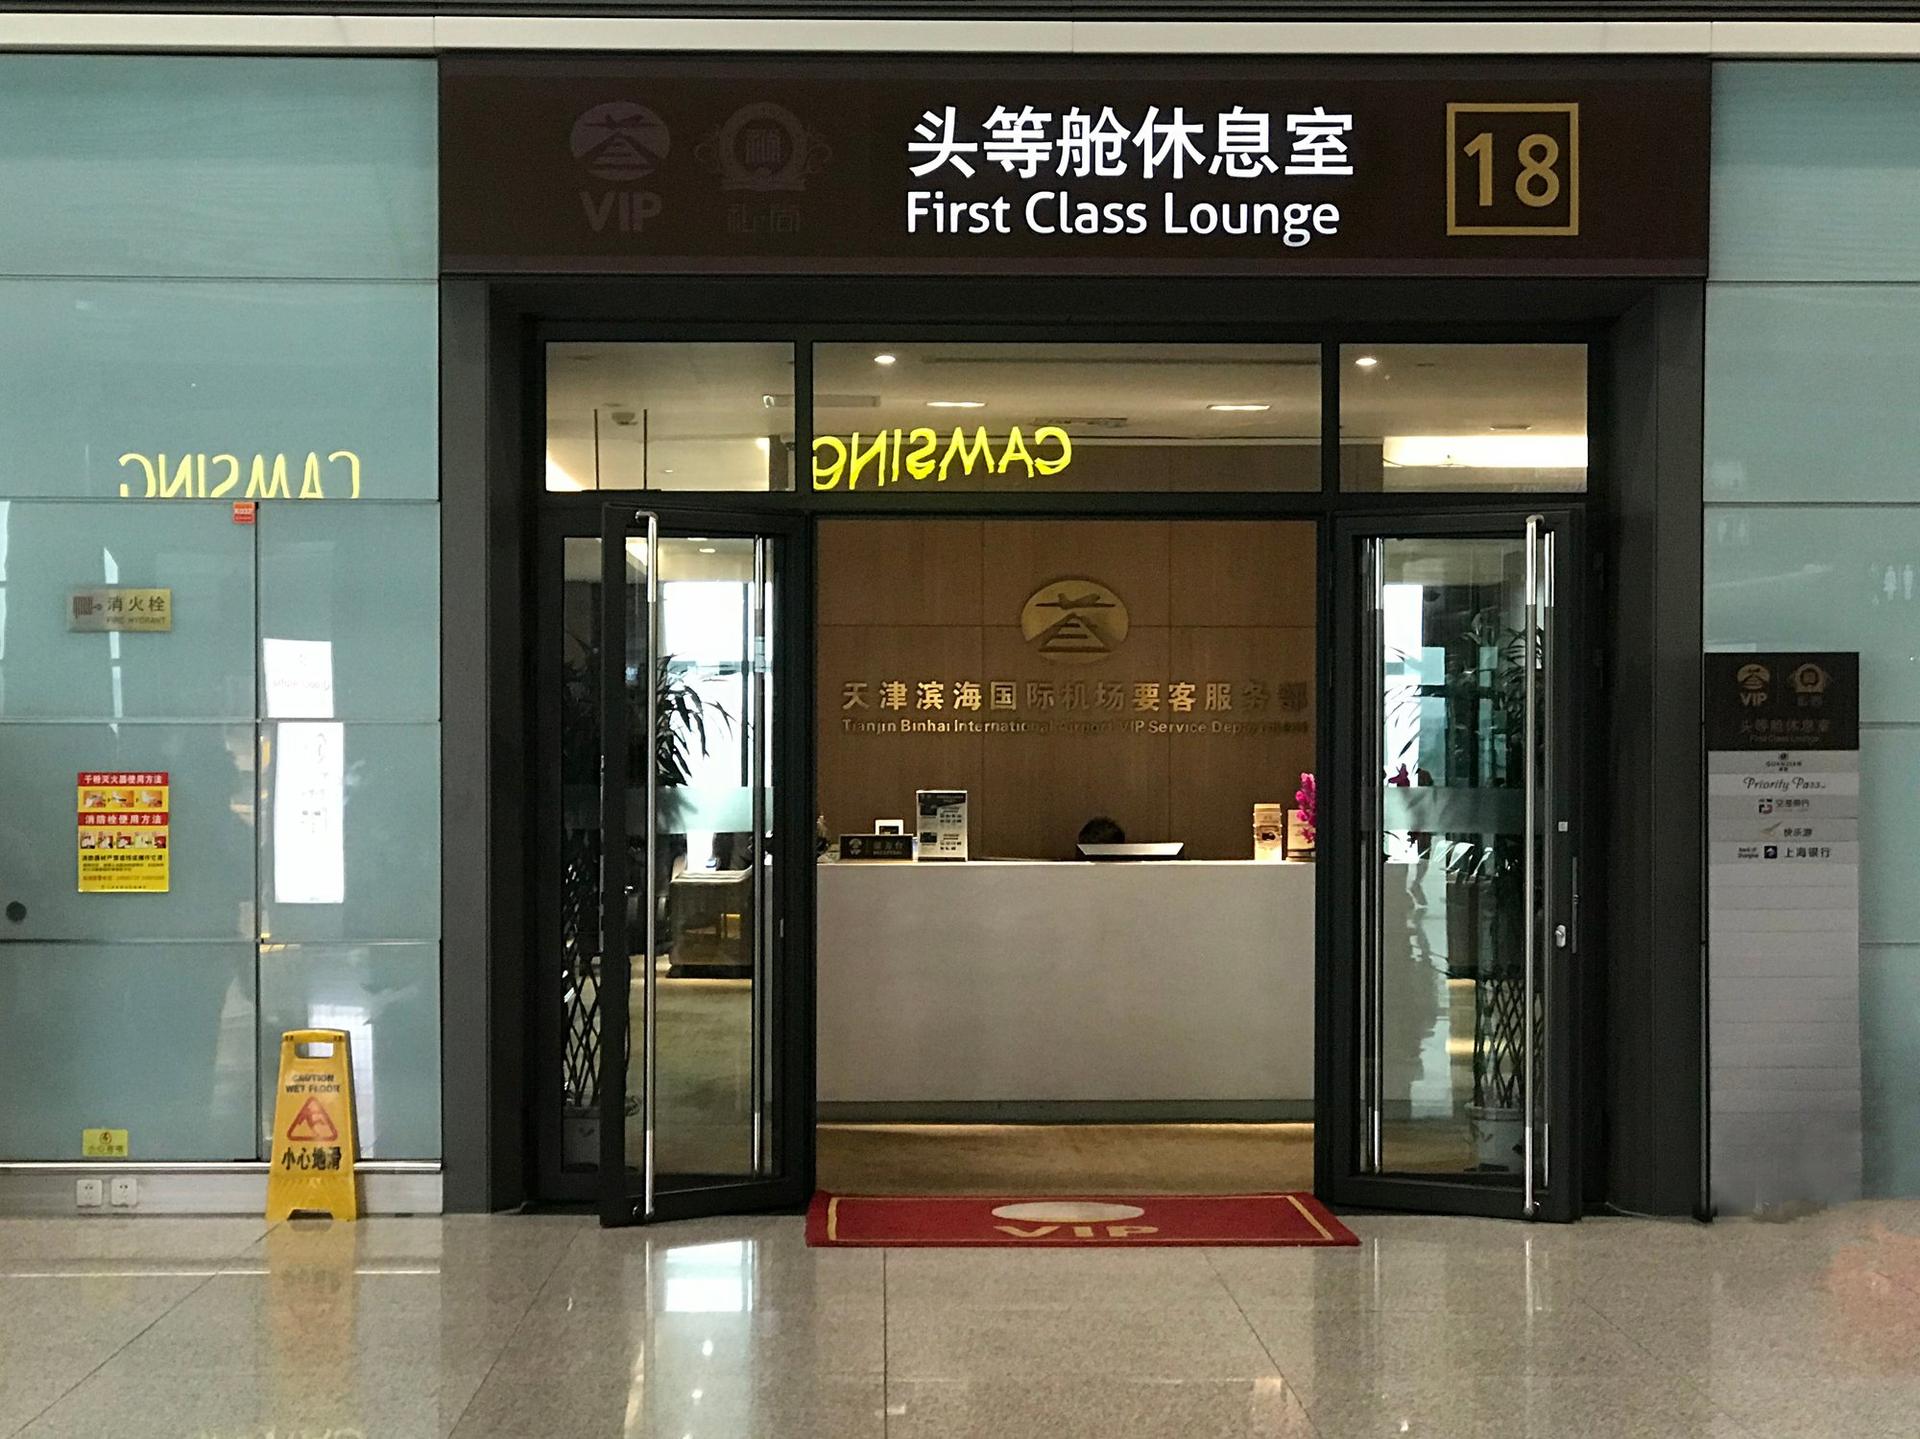 First Class Lounge (No. 18) image 10 of 10